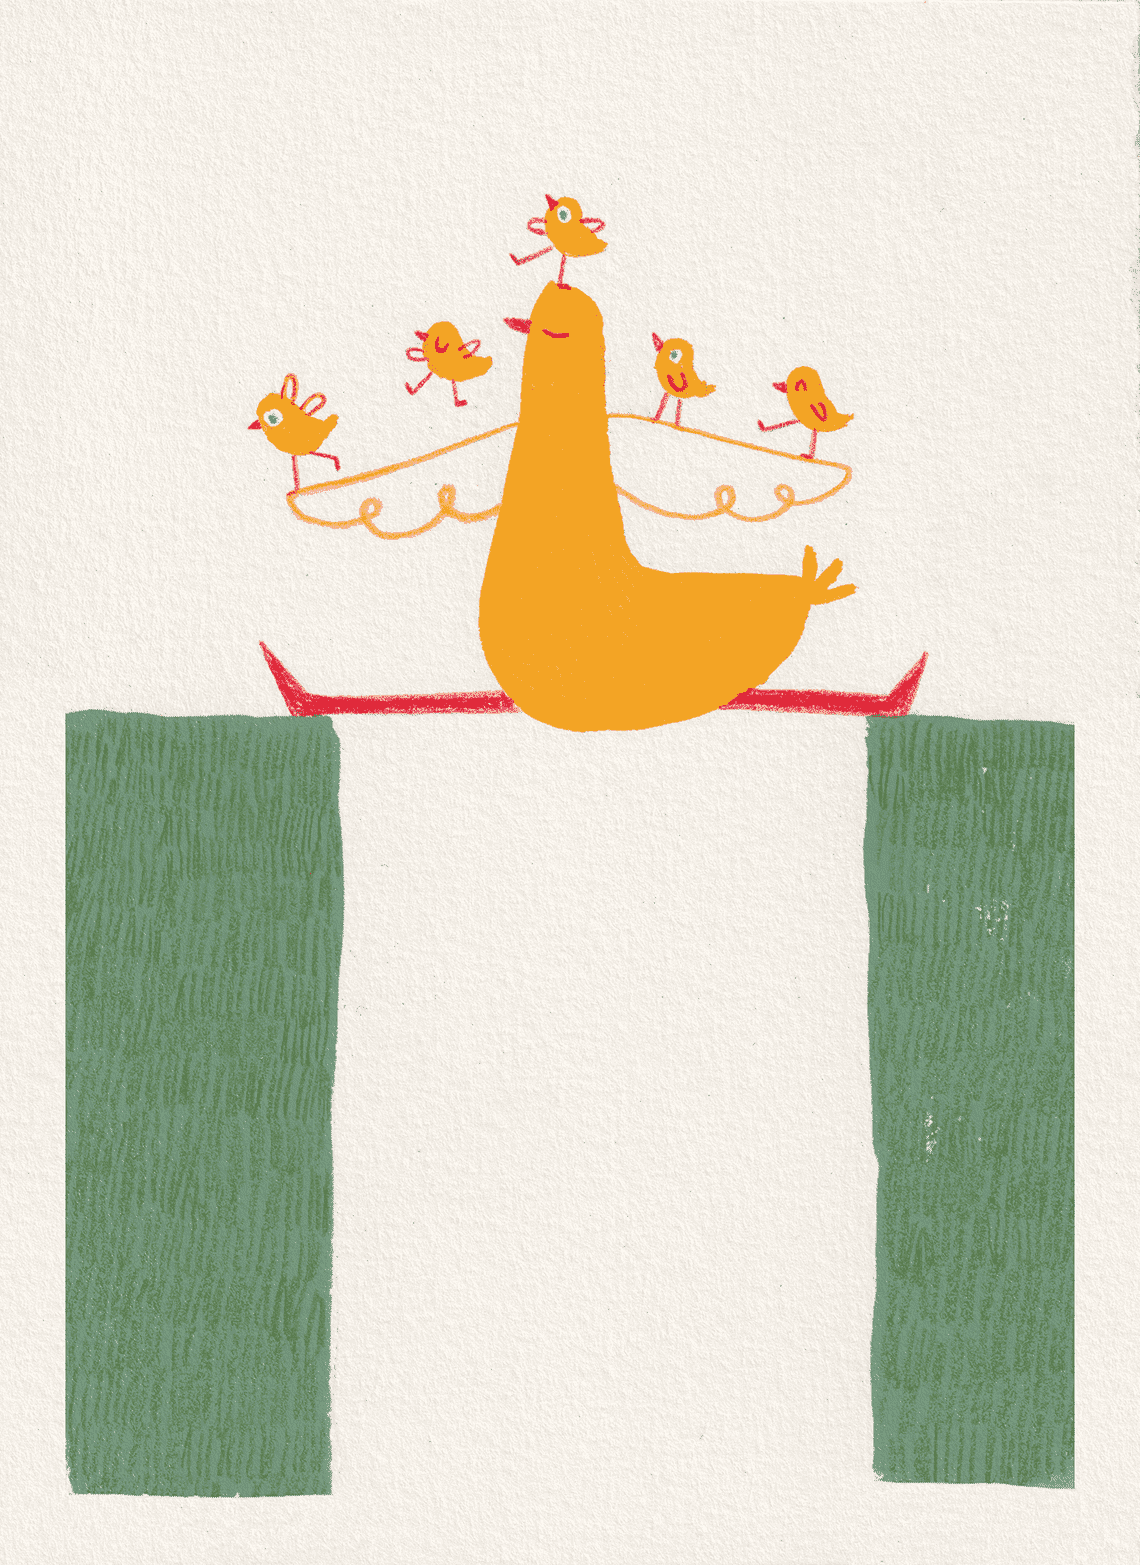 Gouache illustration of a mother duck serving as a bridge to her small children.